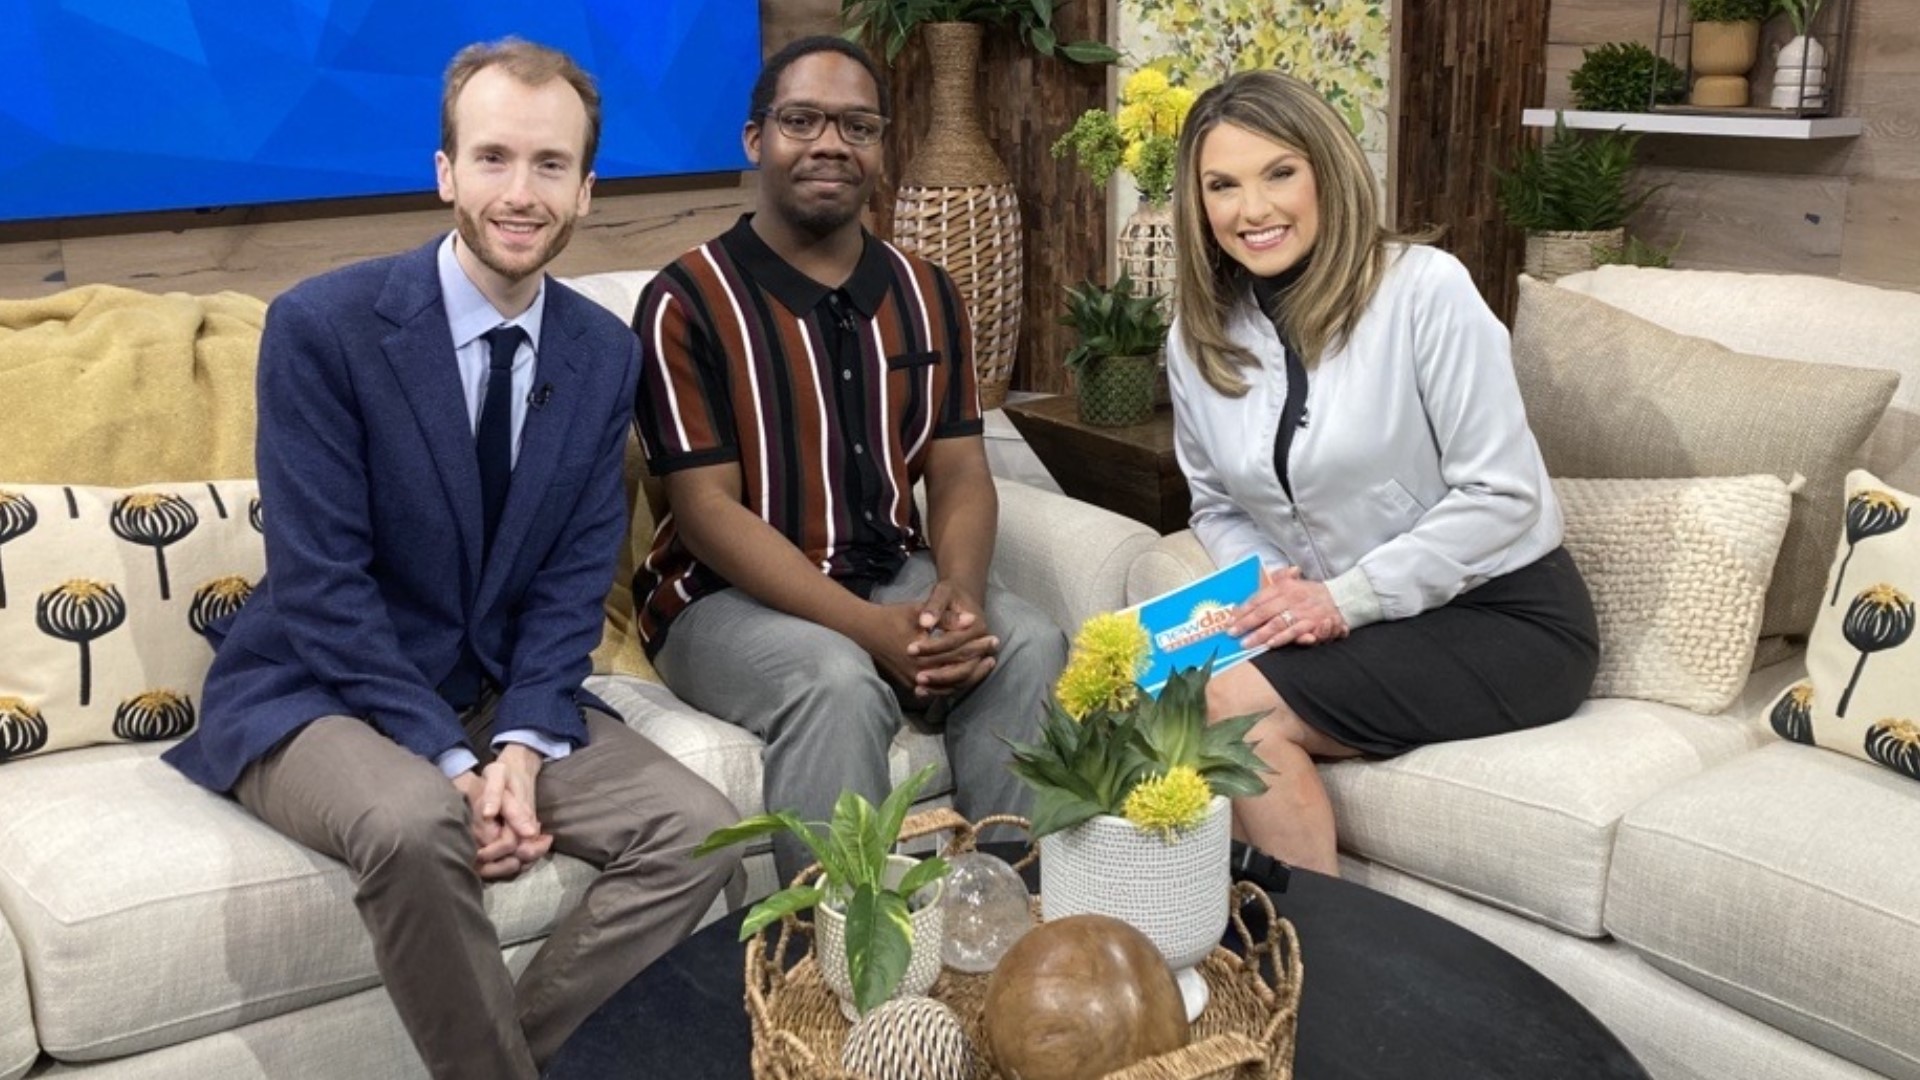 Composer Quinn Mason and Harmonia Orchestra director William White joined the show to discuss Mason's new symphony premiering in Shoreline. #newdaynw